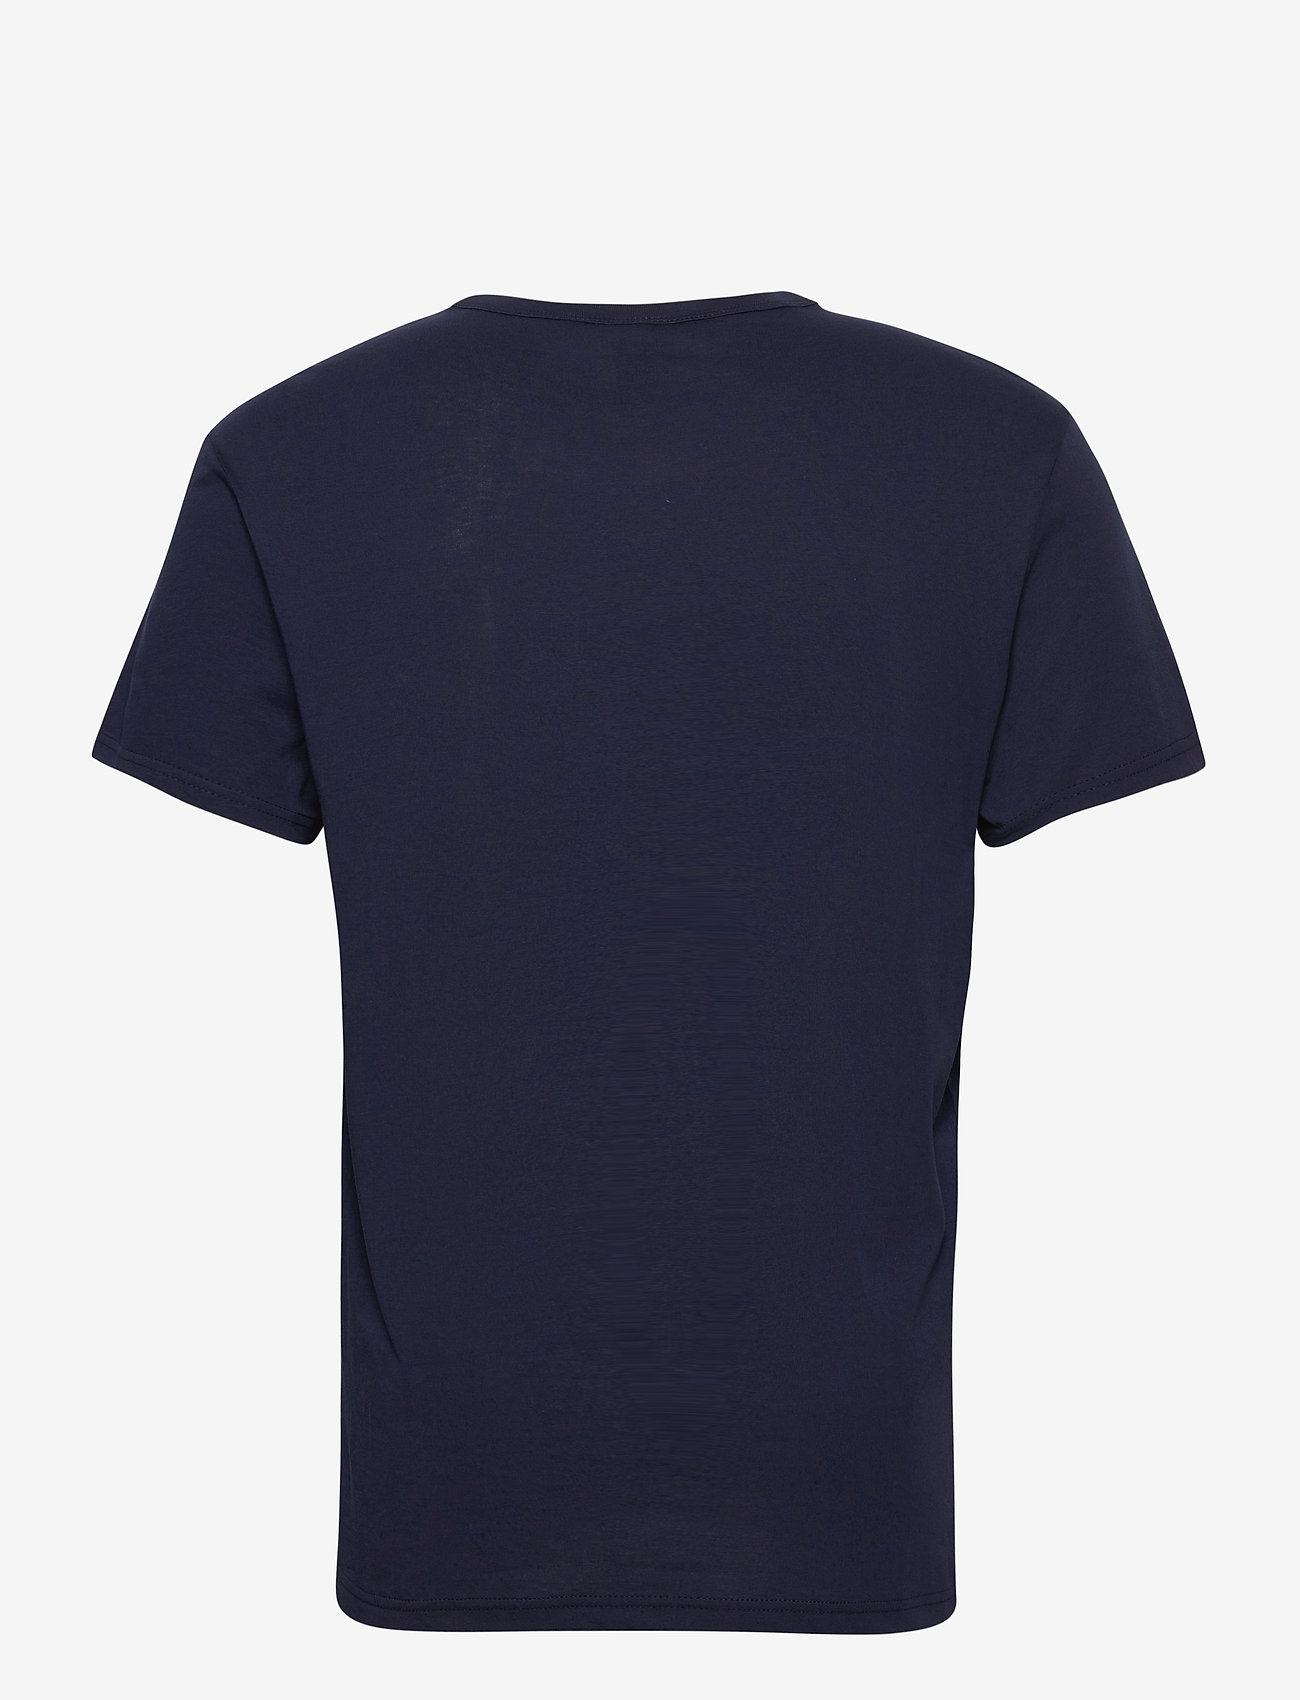 G-Star RAW - Holorn r t s\s - short-sleeved t-shirts - sartho blue - 1